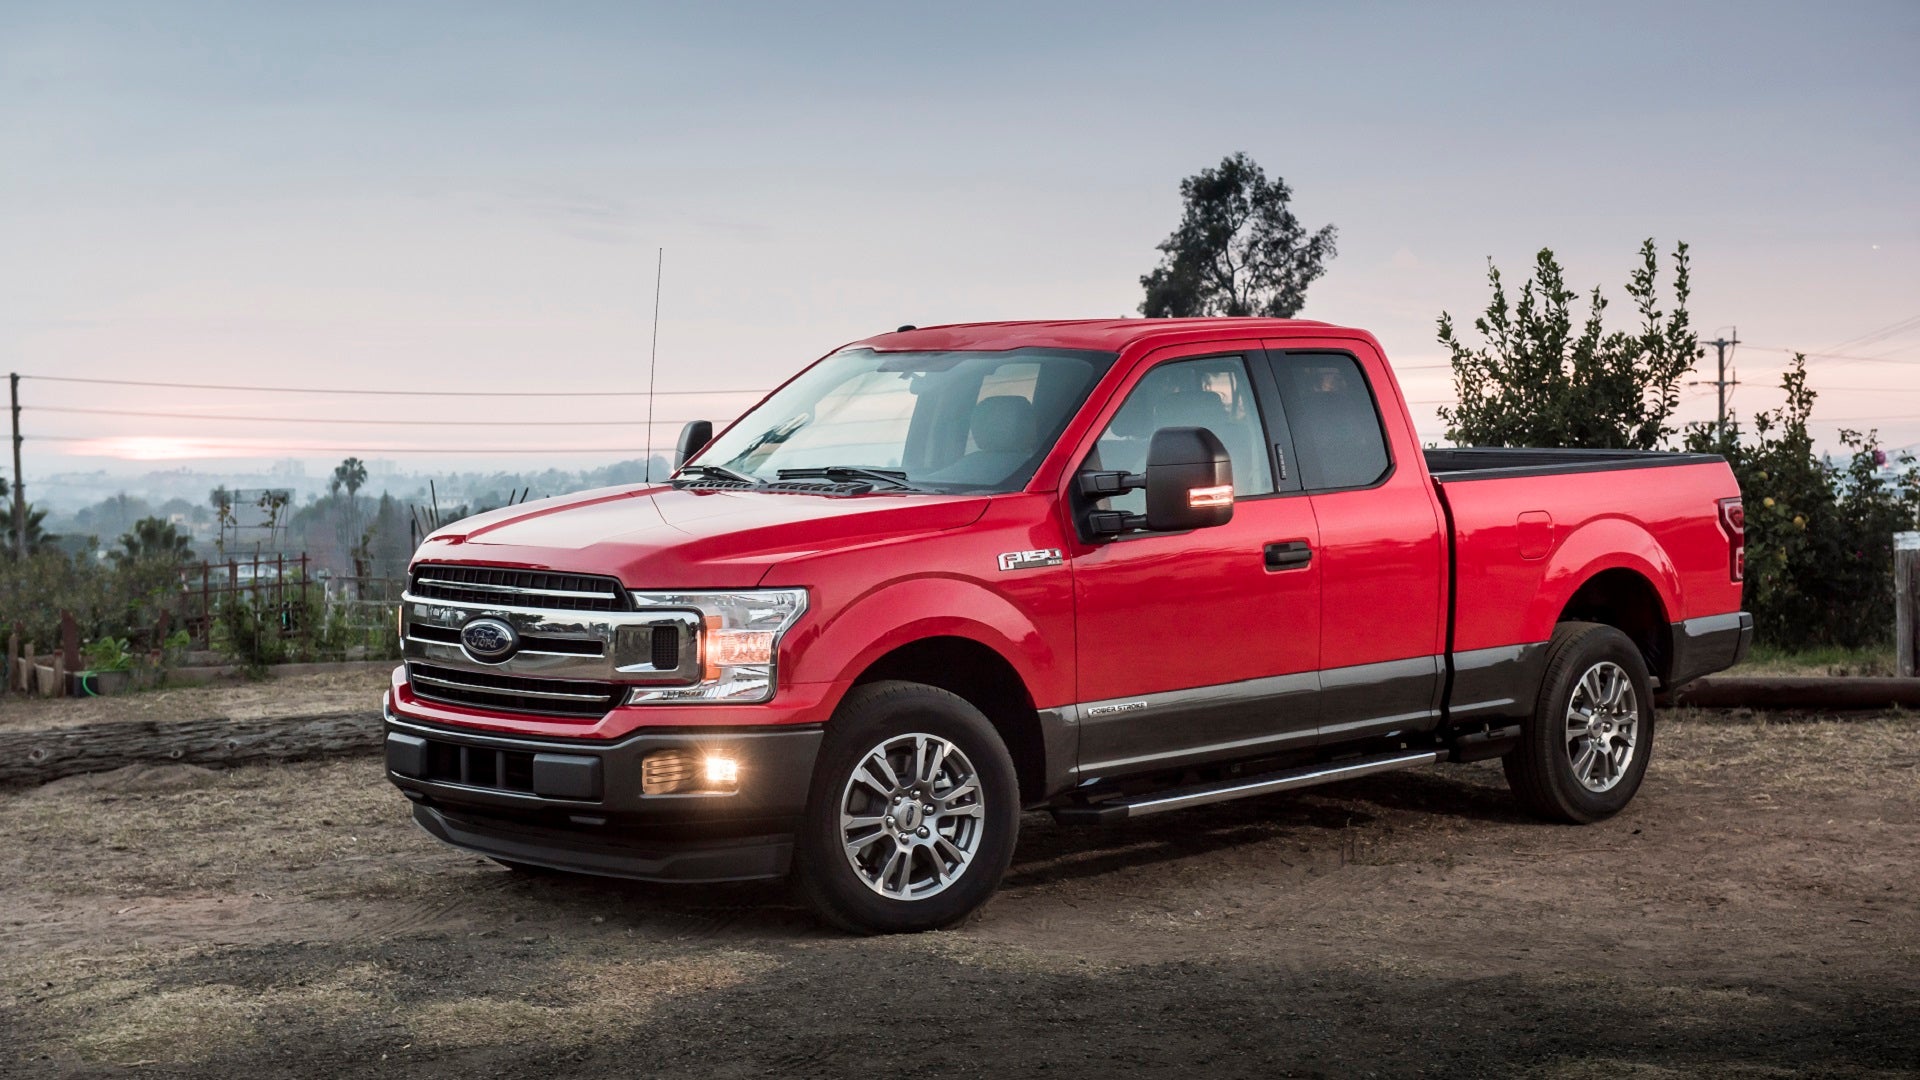 A Diesel-Powered Ford F-150 Is Cool, but Is It Worth the Hefty Price Tag?